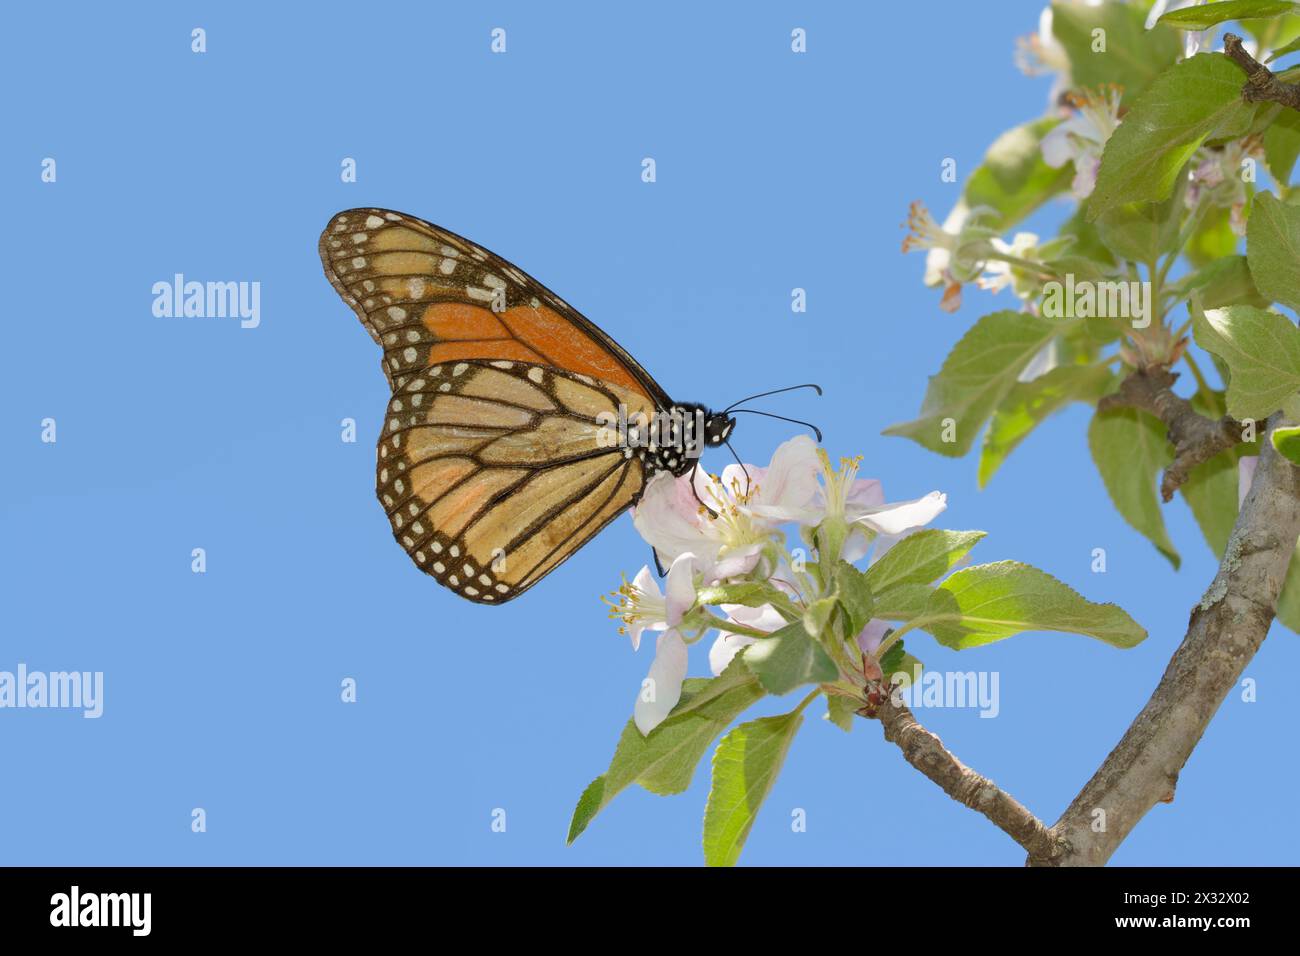 Ventral view of a Monarch butterfly in early spring, getting nectar from an apple flower, with blue sky background Stock Photo